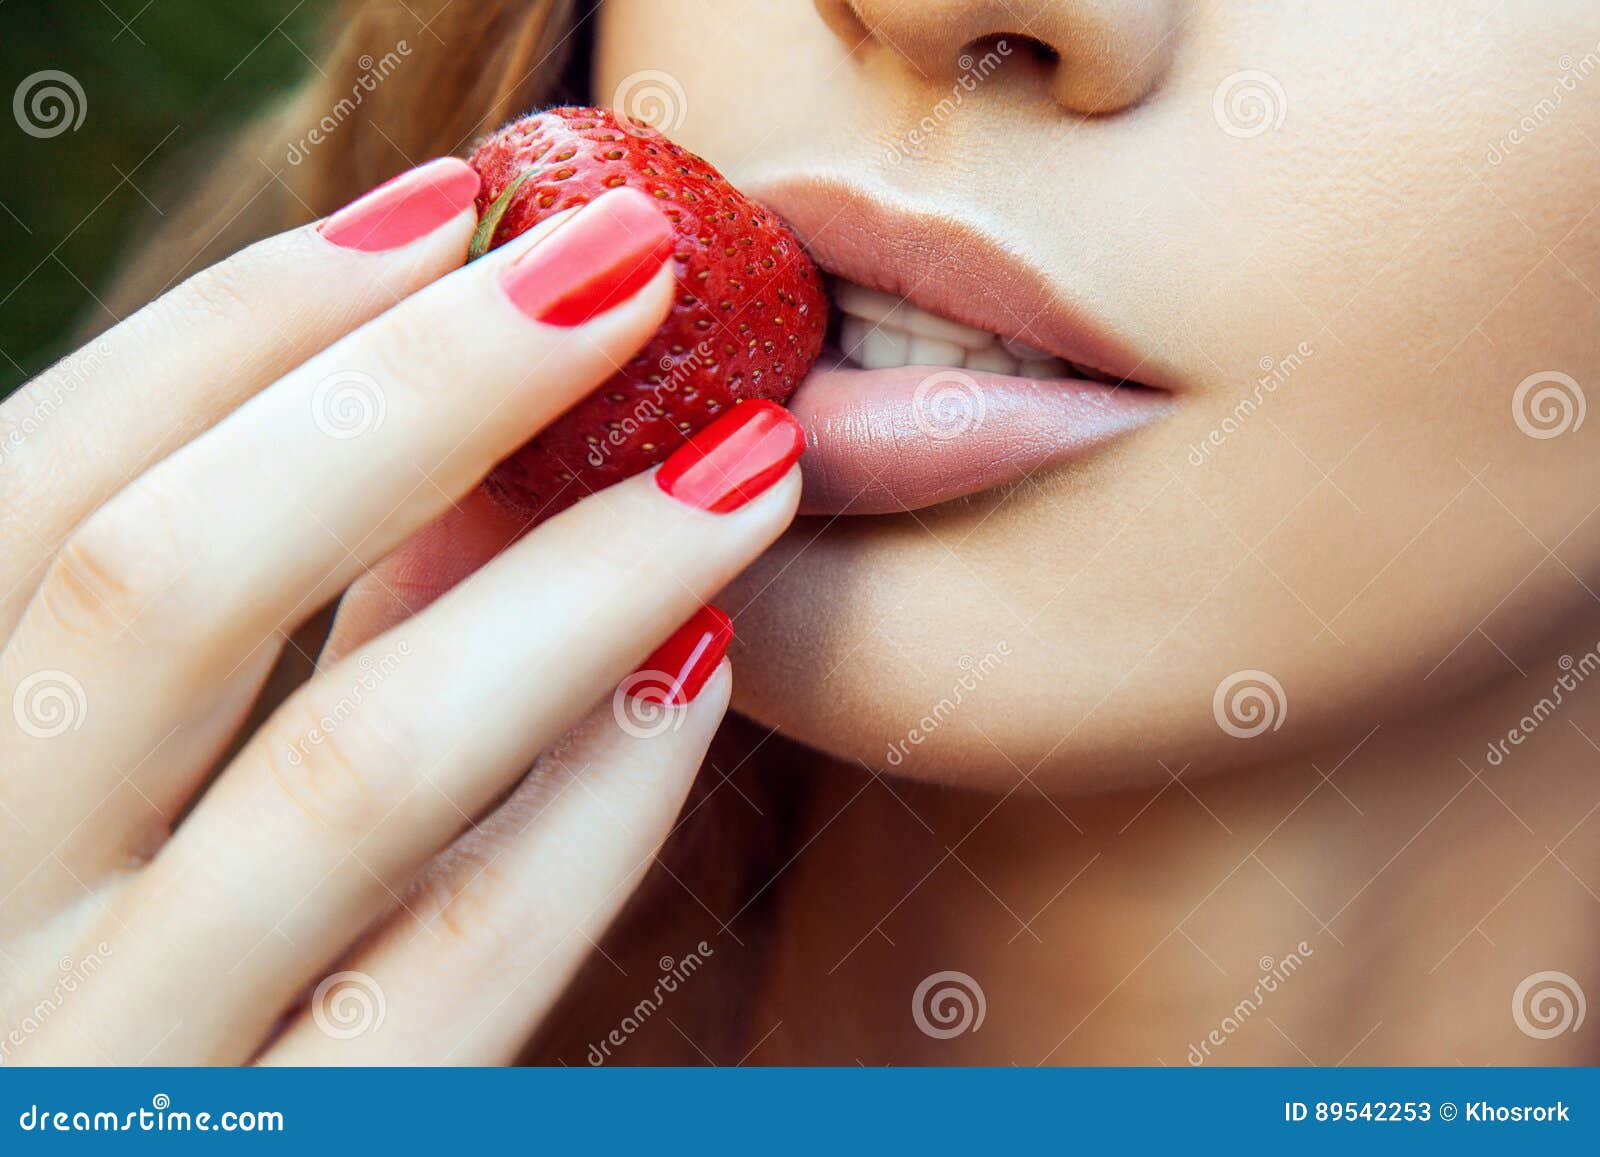 Woman Eating Strawberry Sensual Red Lips Red Manicure And Natural Lipstick Stock Image Image 